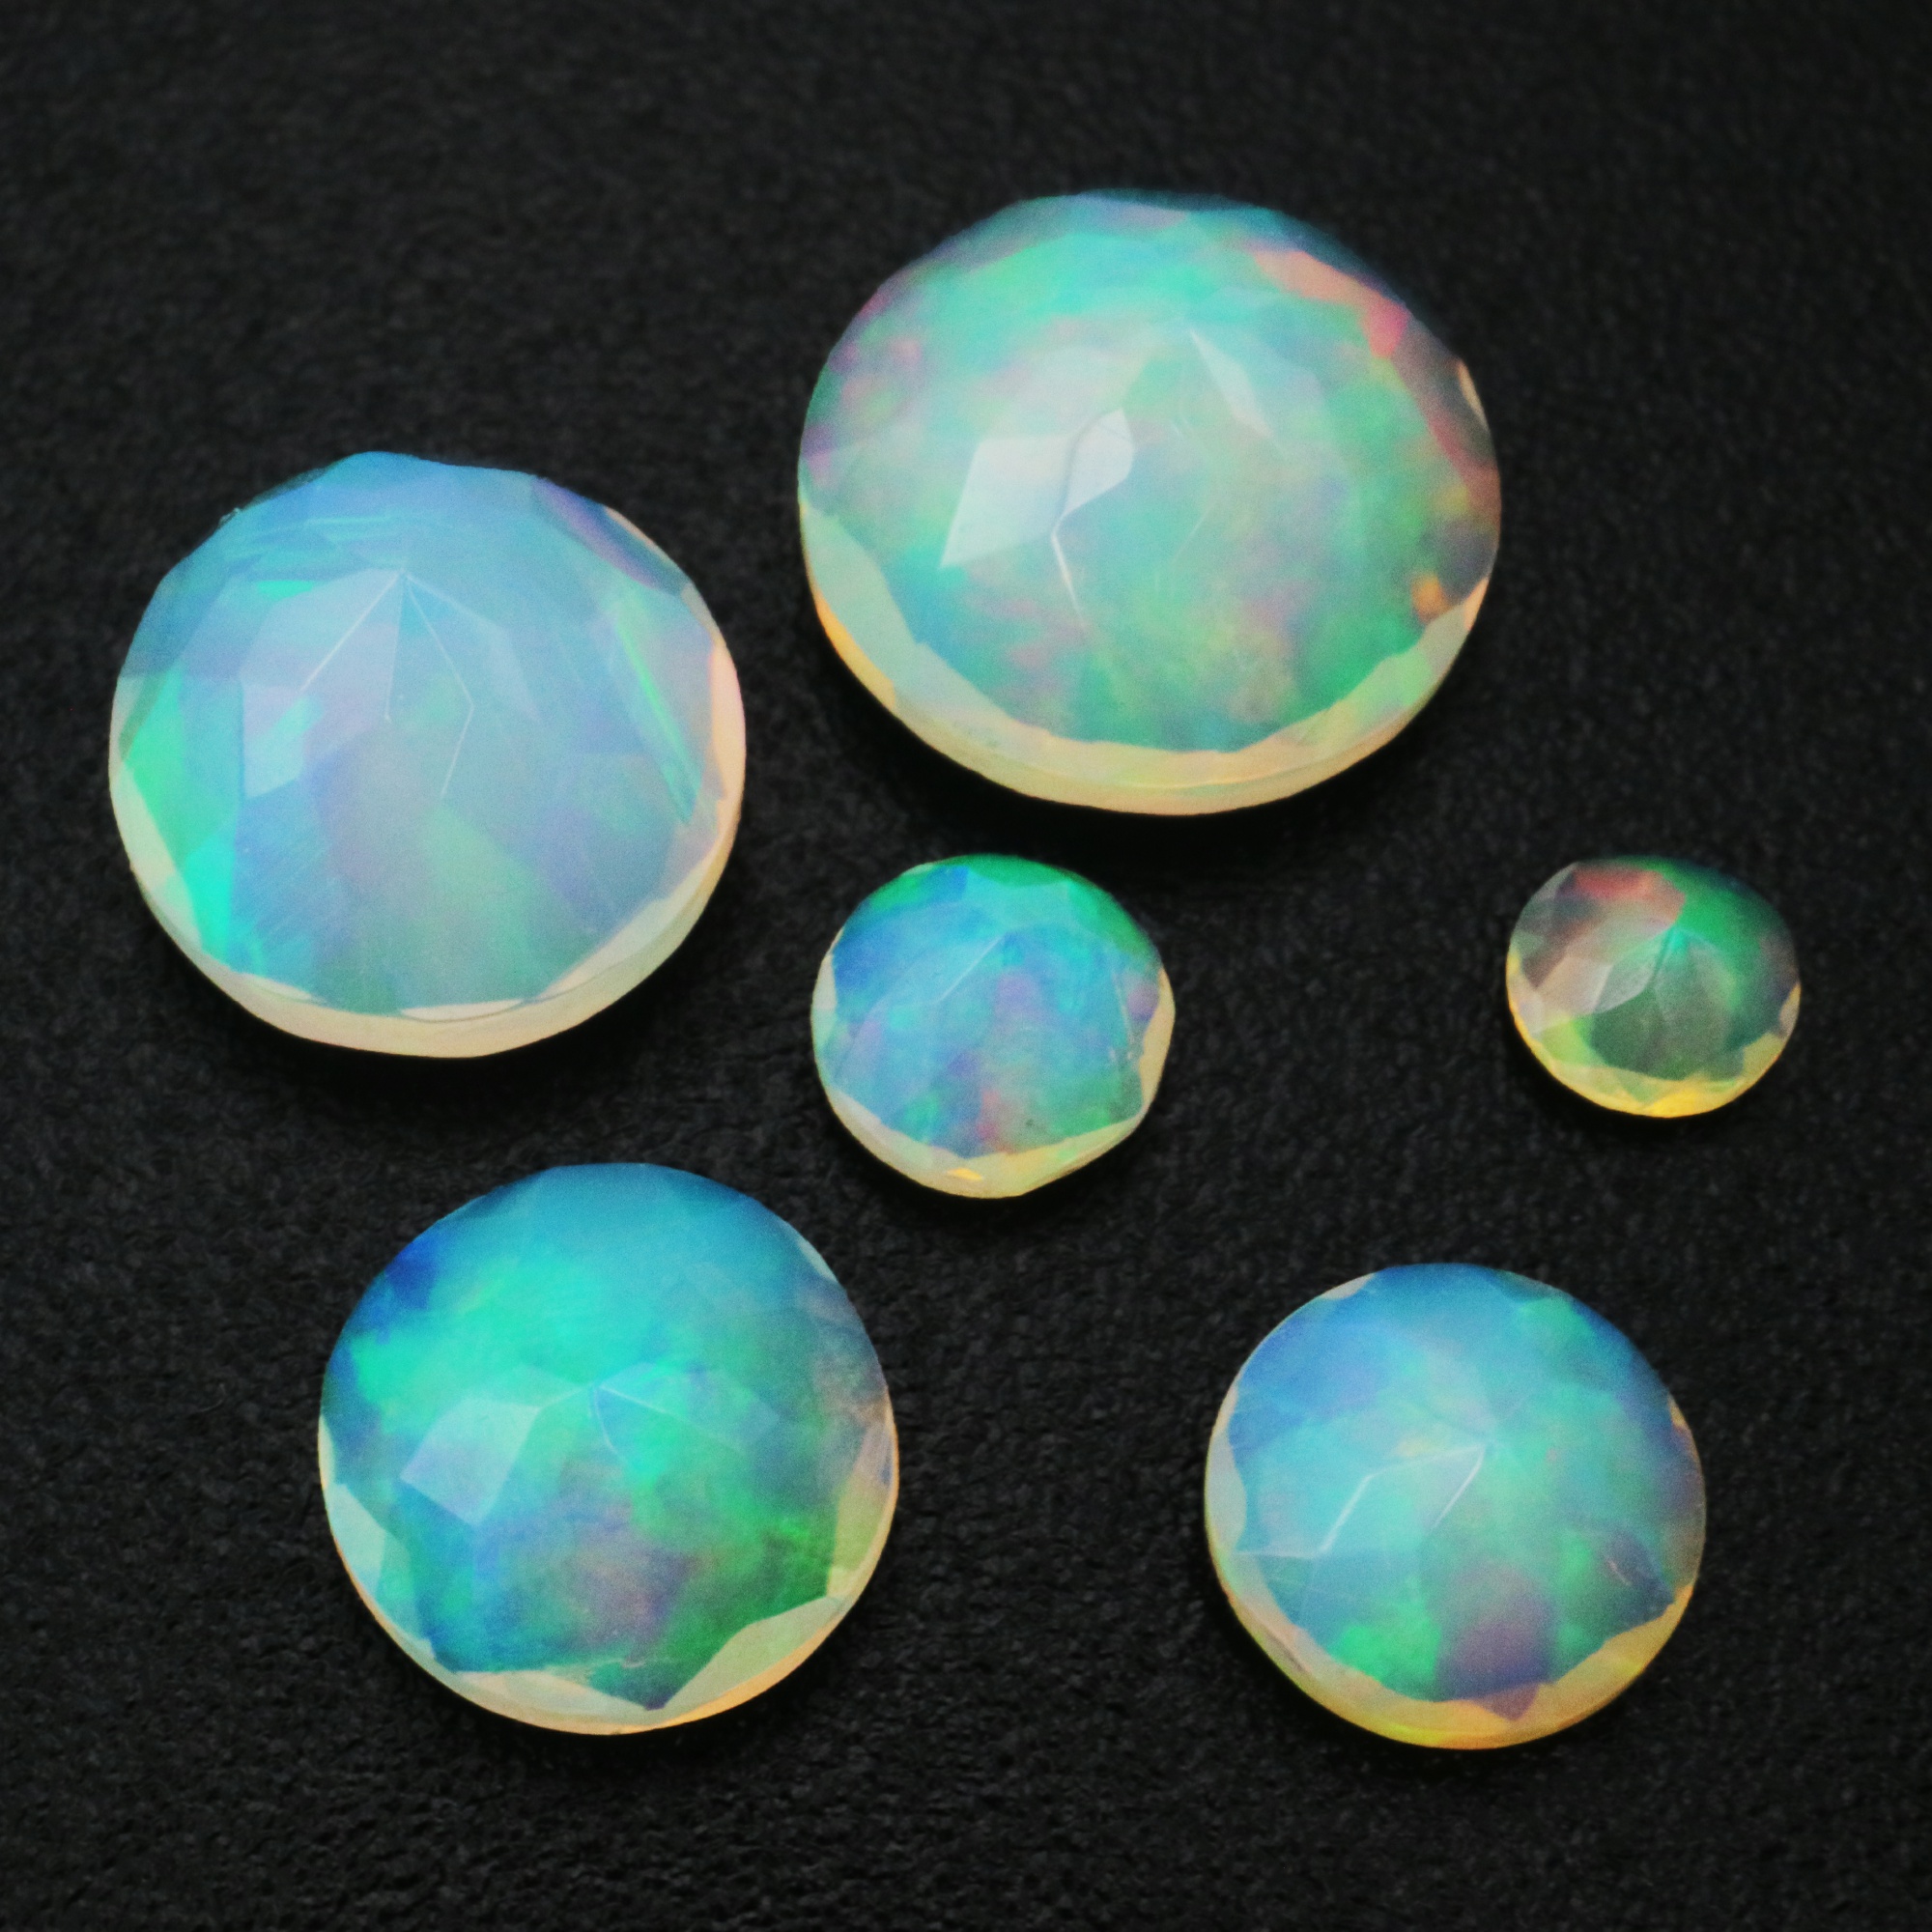 1Pcs Round Africa Opal October Birthstone Color Changing Faceted Cut AAA Grade Loose Gemstone Natural Semi Precious Stone DIY Jewelry Supplies 4110175 - Click Image to Close